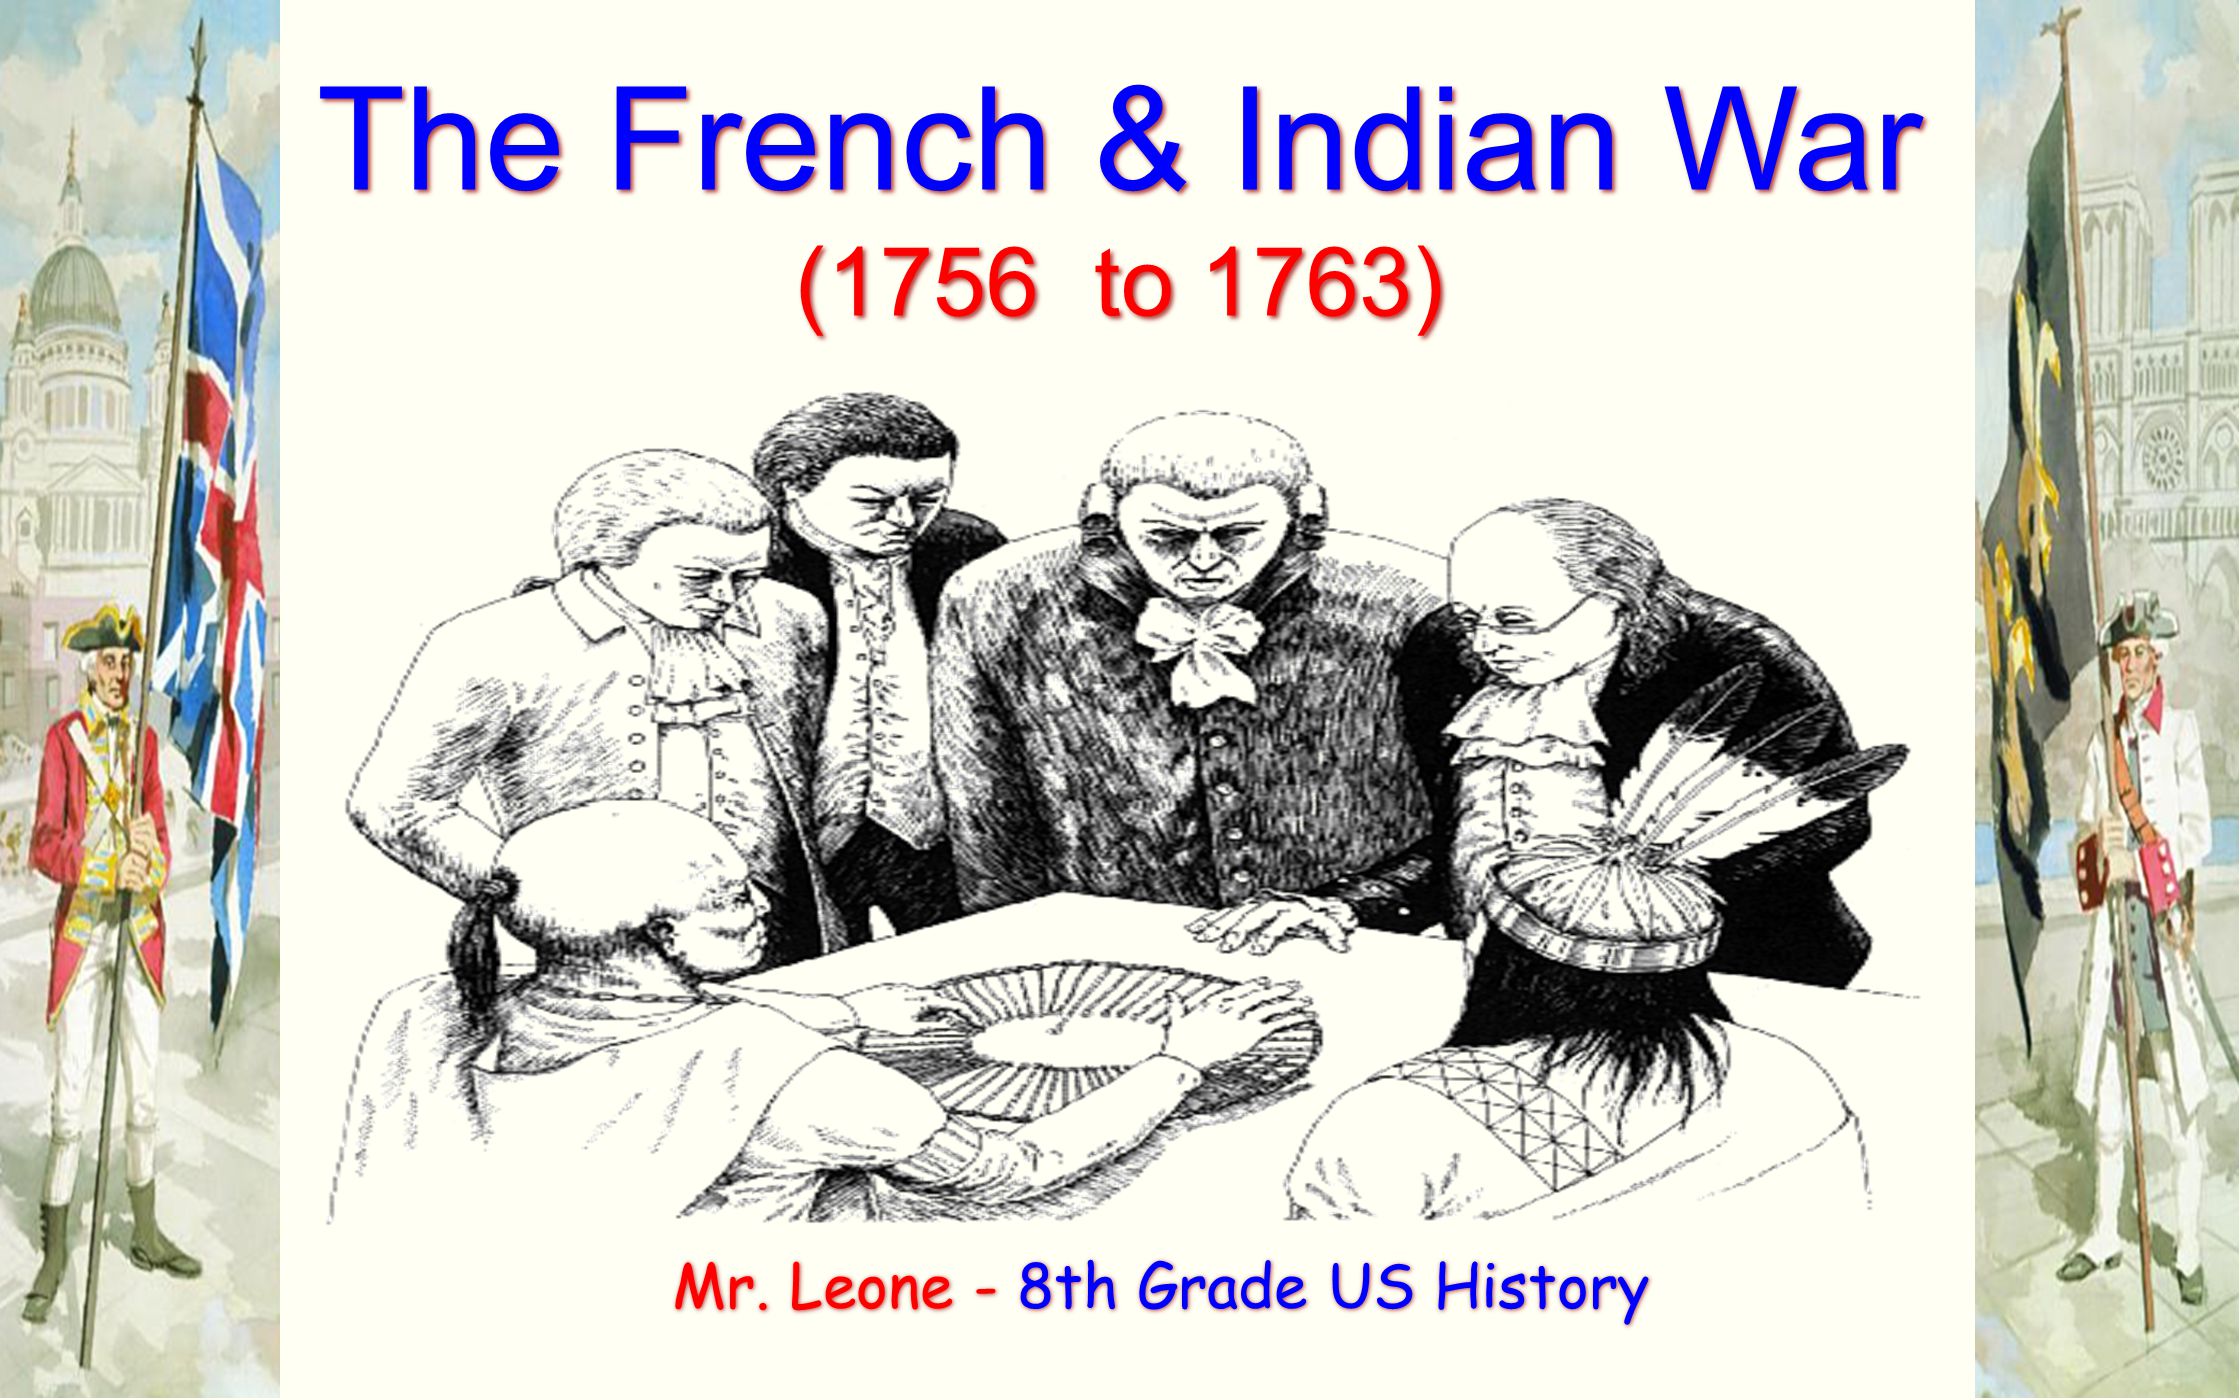 Mr. Leone - 8th Grade US History - ppt video online download